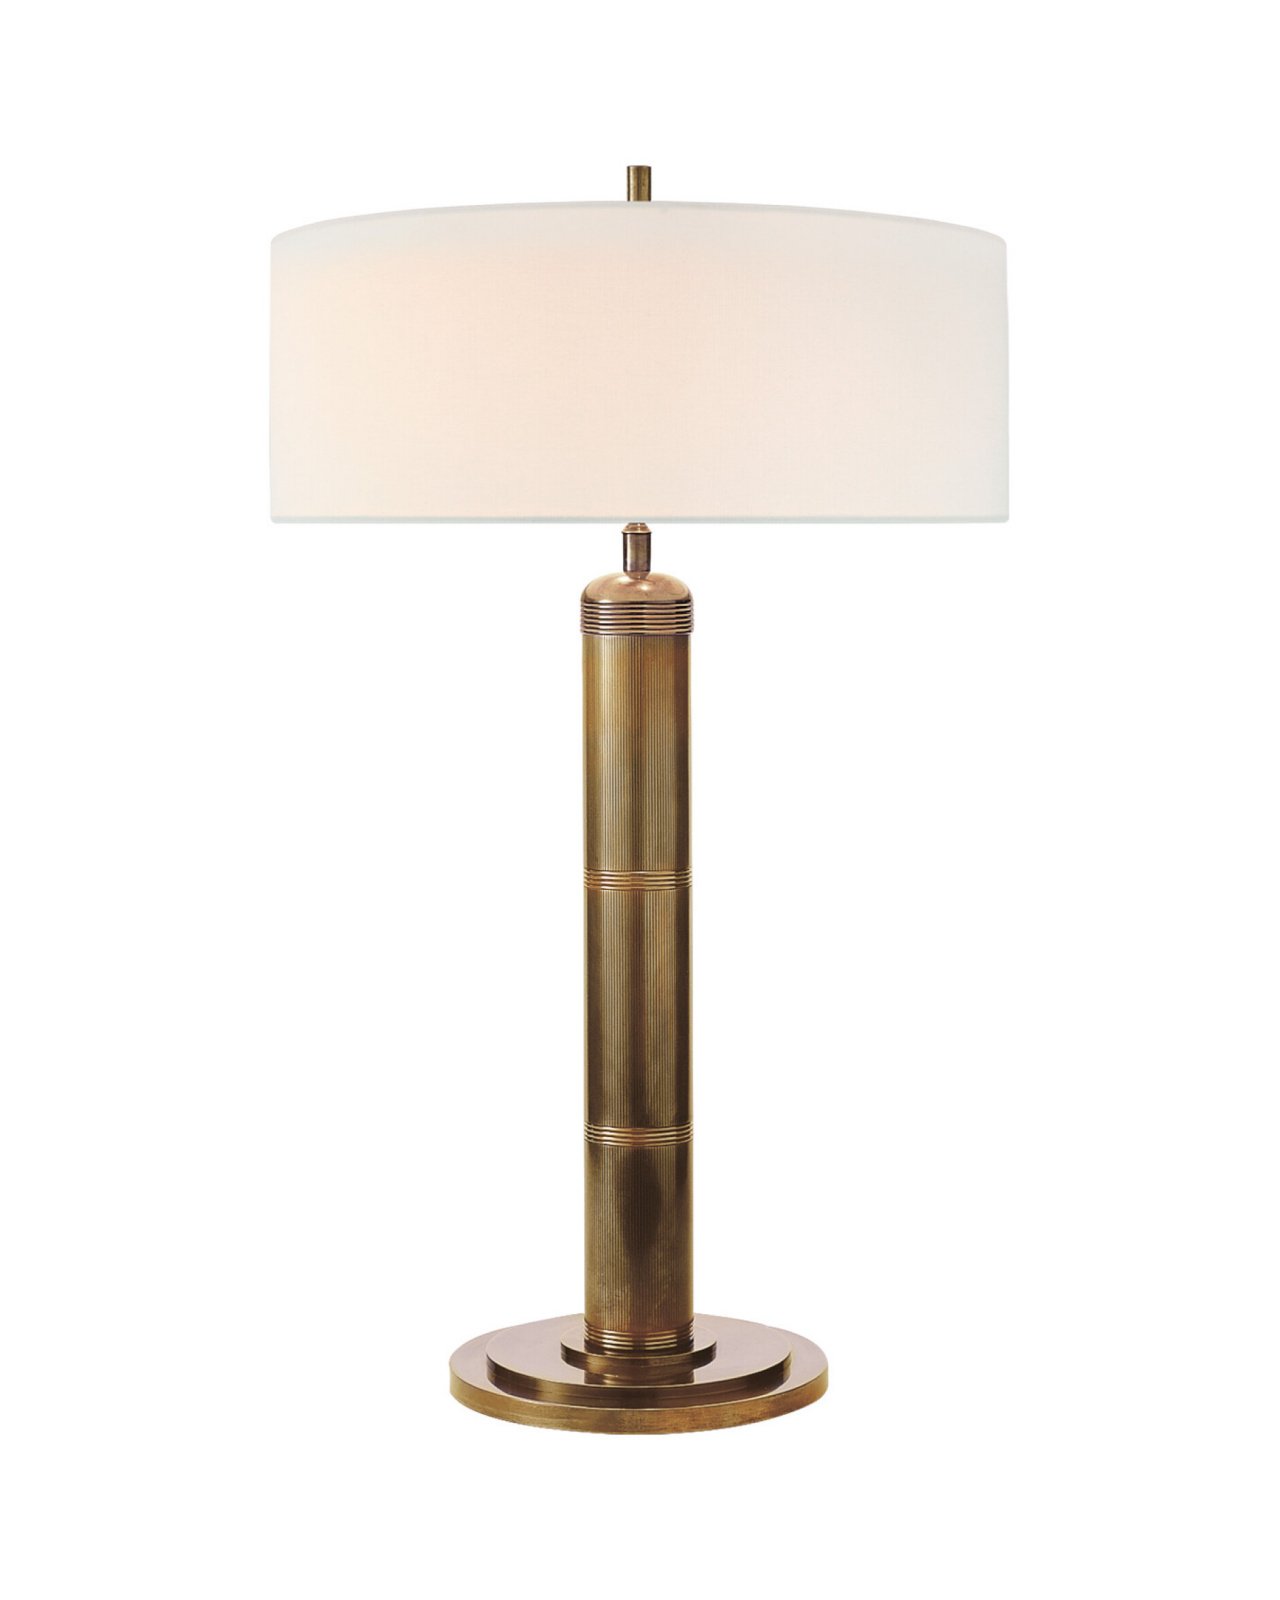 Longacre Tall Table Lamp Antique Brass